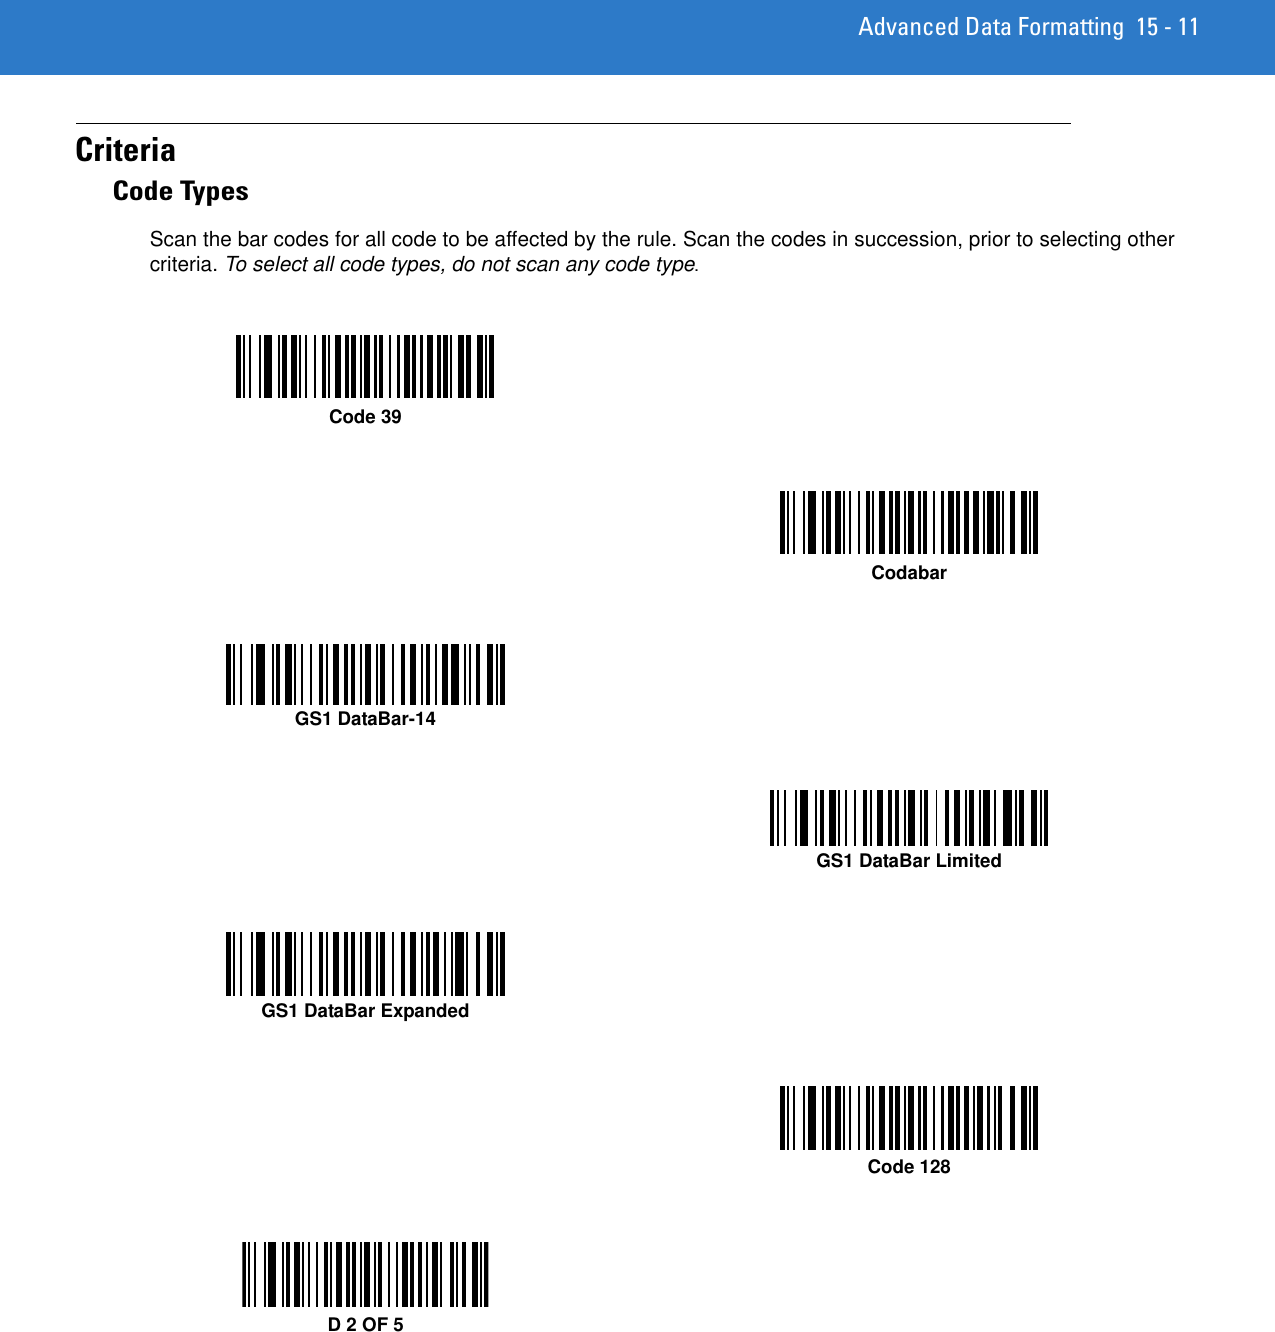 Advanced Data Formatting 15 - 11CriteriaCode Types Scan the bar codes for all code to be affected by the rule. Scan the codes in succession, prior to selecting other criteria. To select all code types, do not scan any code type.Code 39CodabarGS1 DataBar-14GS1 DataBar LimitedGS1 DataBar ExpandedCode 128D 2 OF 5